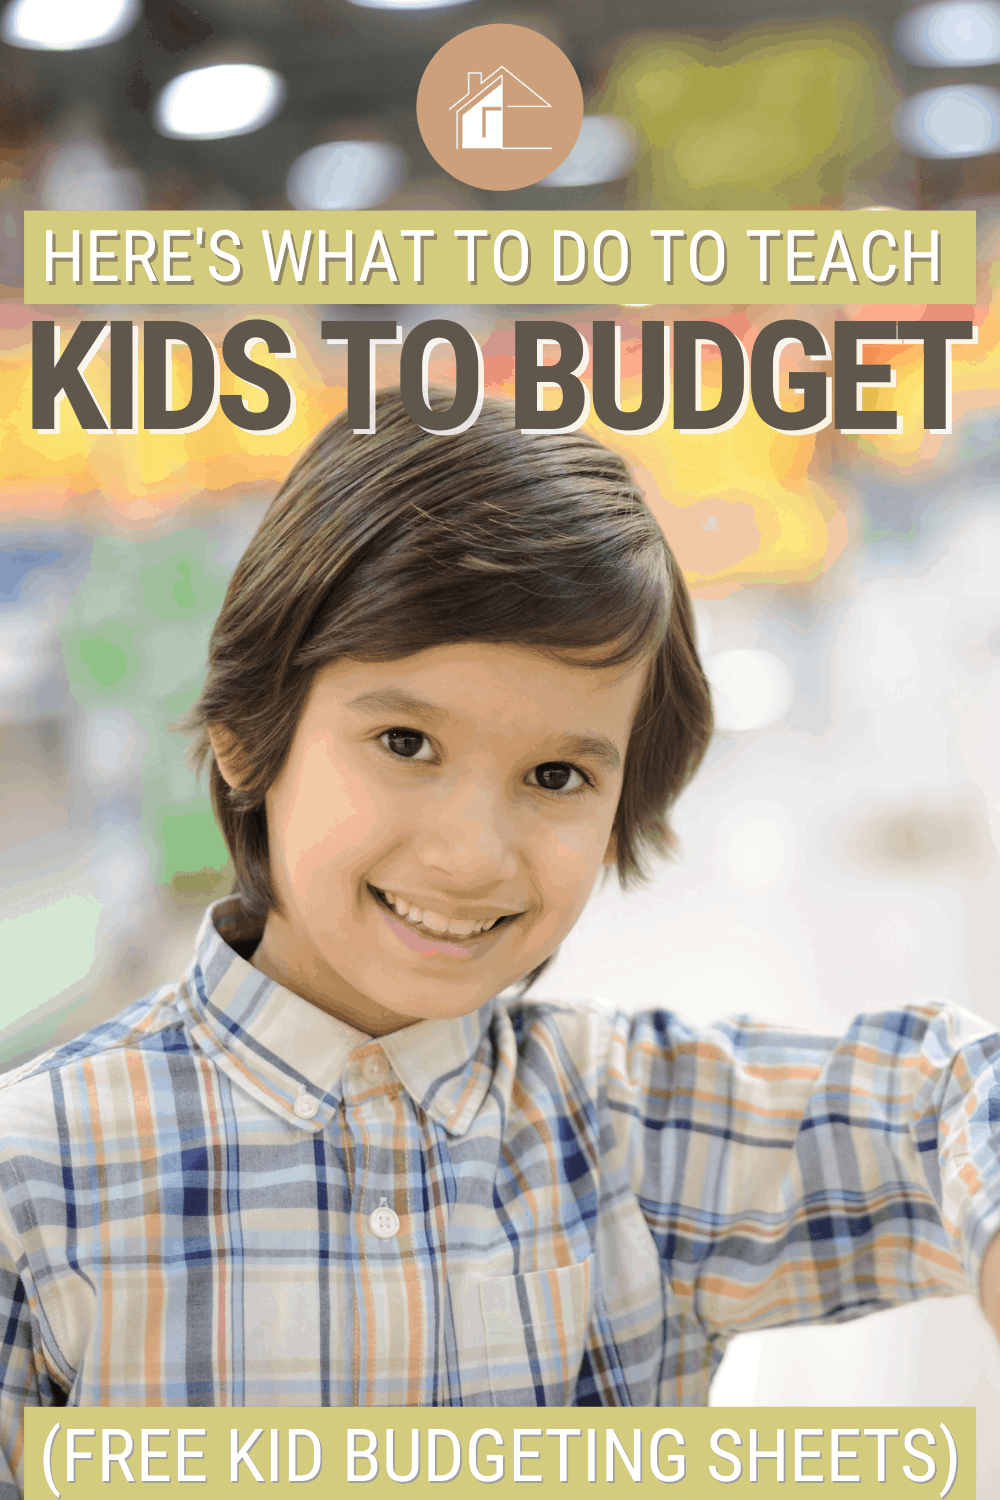 Start teaching kids to budget at a young age. Learn the tips and tricks to get started, plus a free kids budgeting sheet to help you along. via @mystayathome